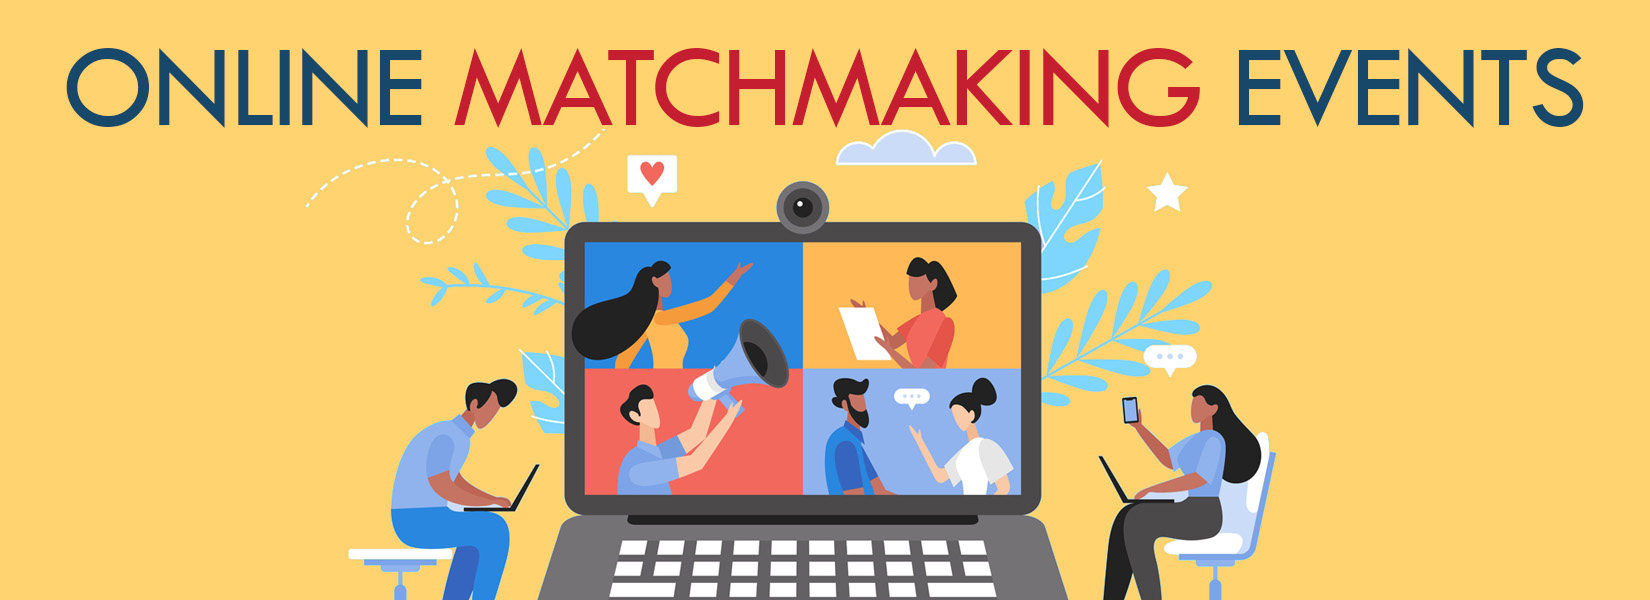 Register for ENLIGHT's Matchmaking Event and Early Career Researchers Leadership Training (29-30 April)